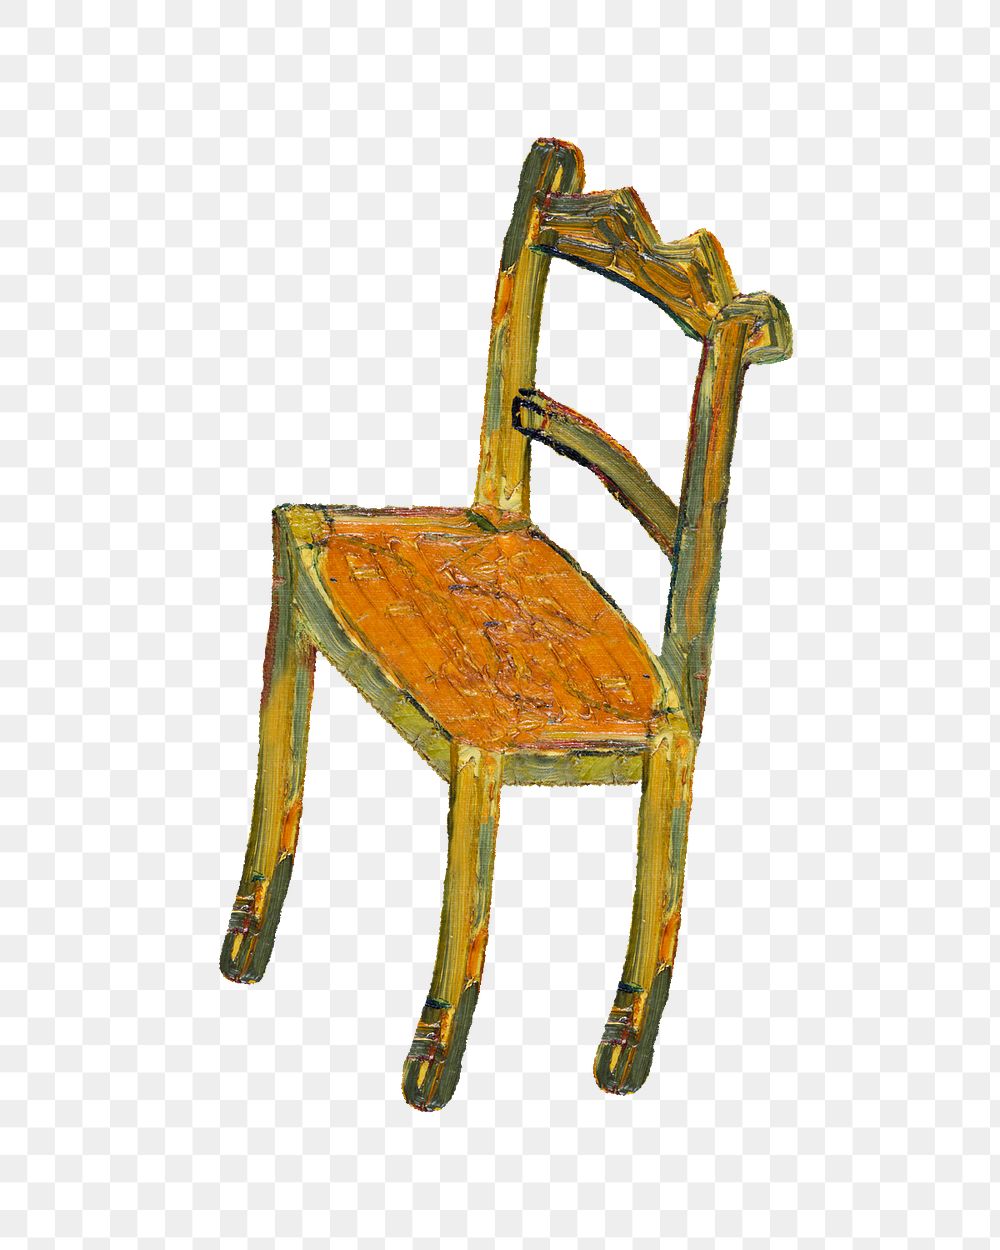 Van Gogh's png chair sticker, transparent background. Remastered by rawpixel.